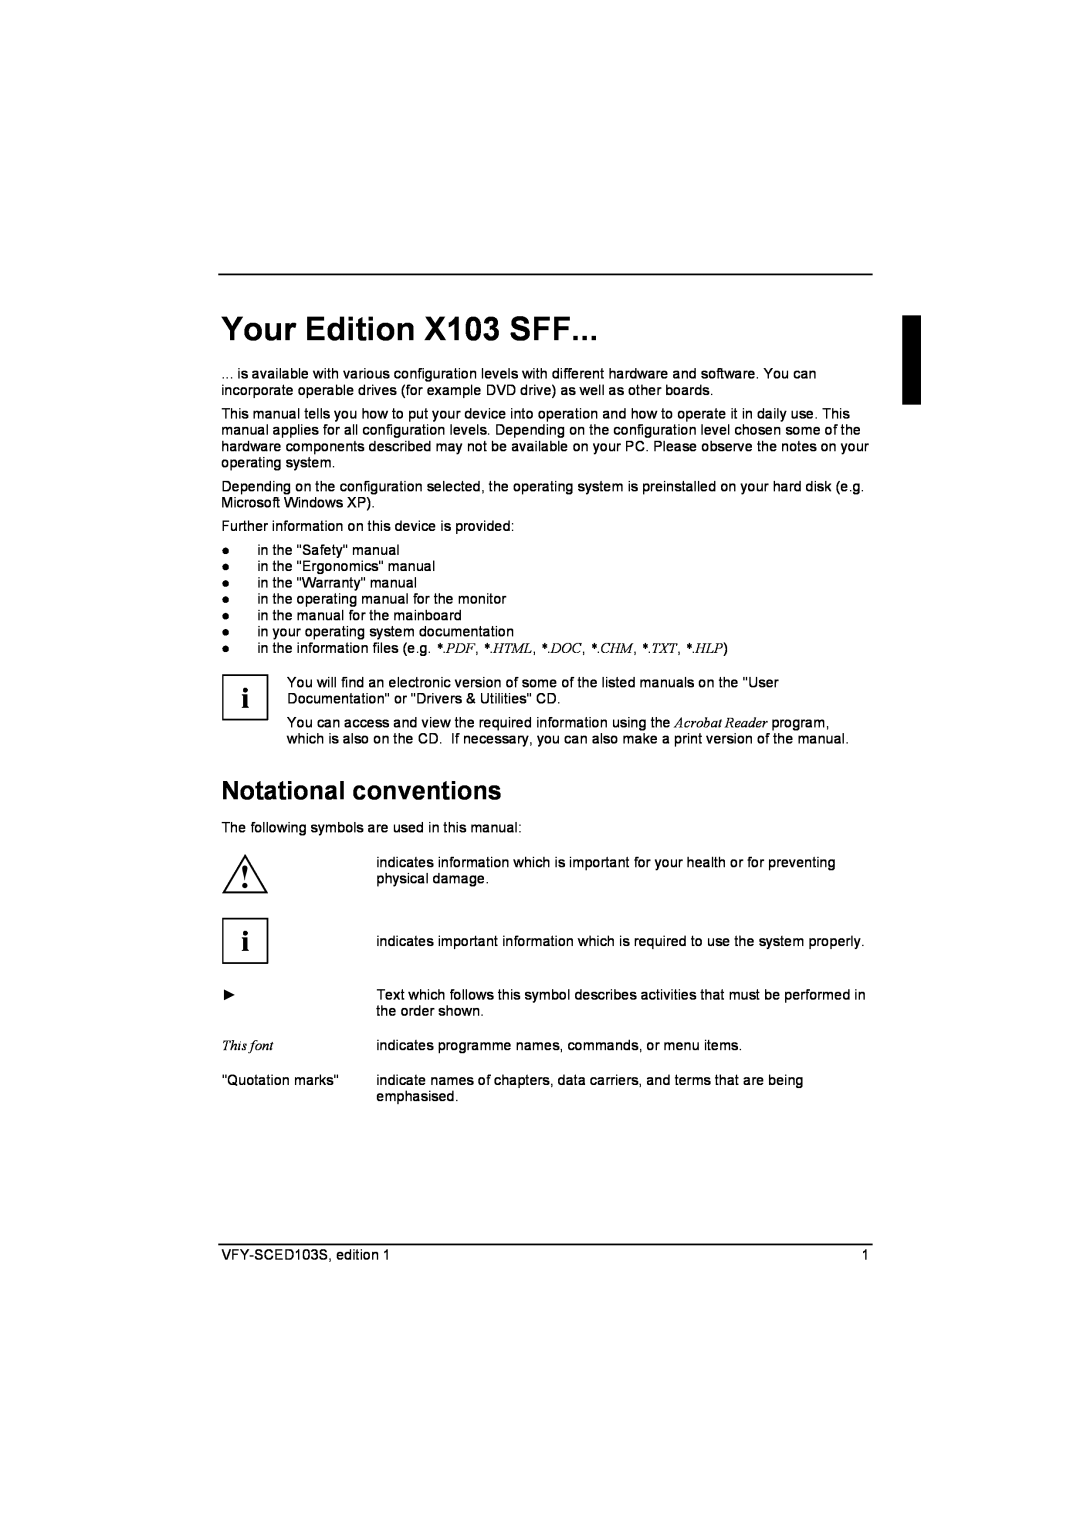 Fujitsu Siemens Computers manual Your Edition X103 SFF, Notational conventions, This font 